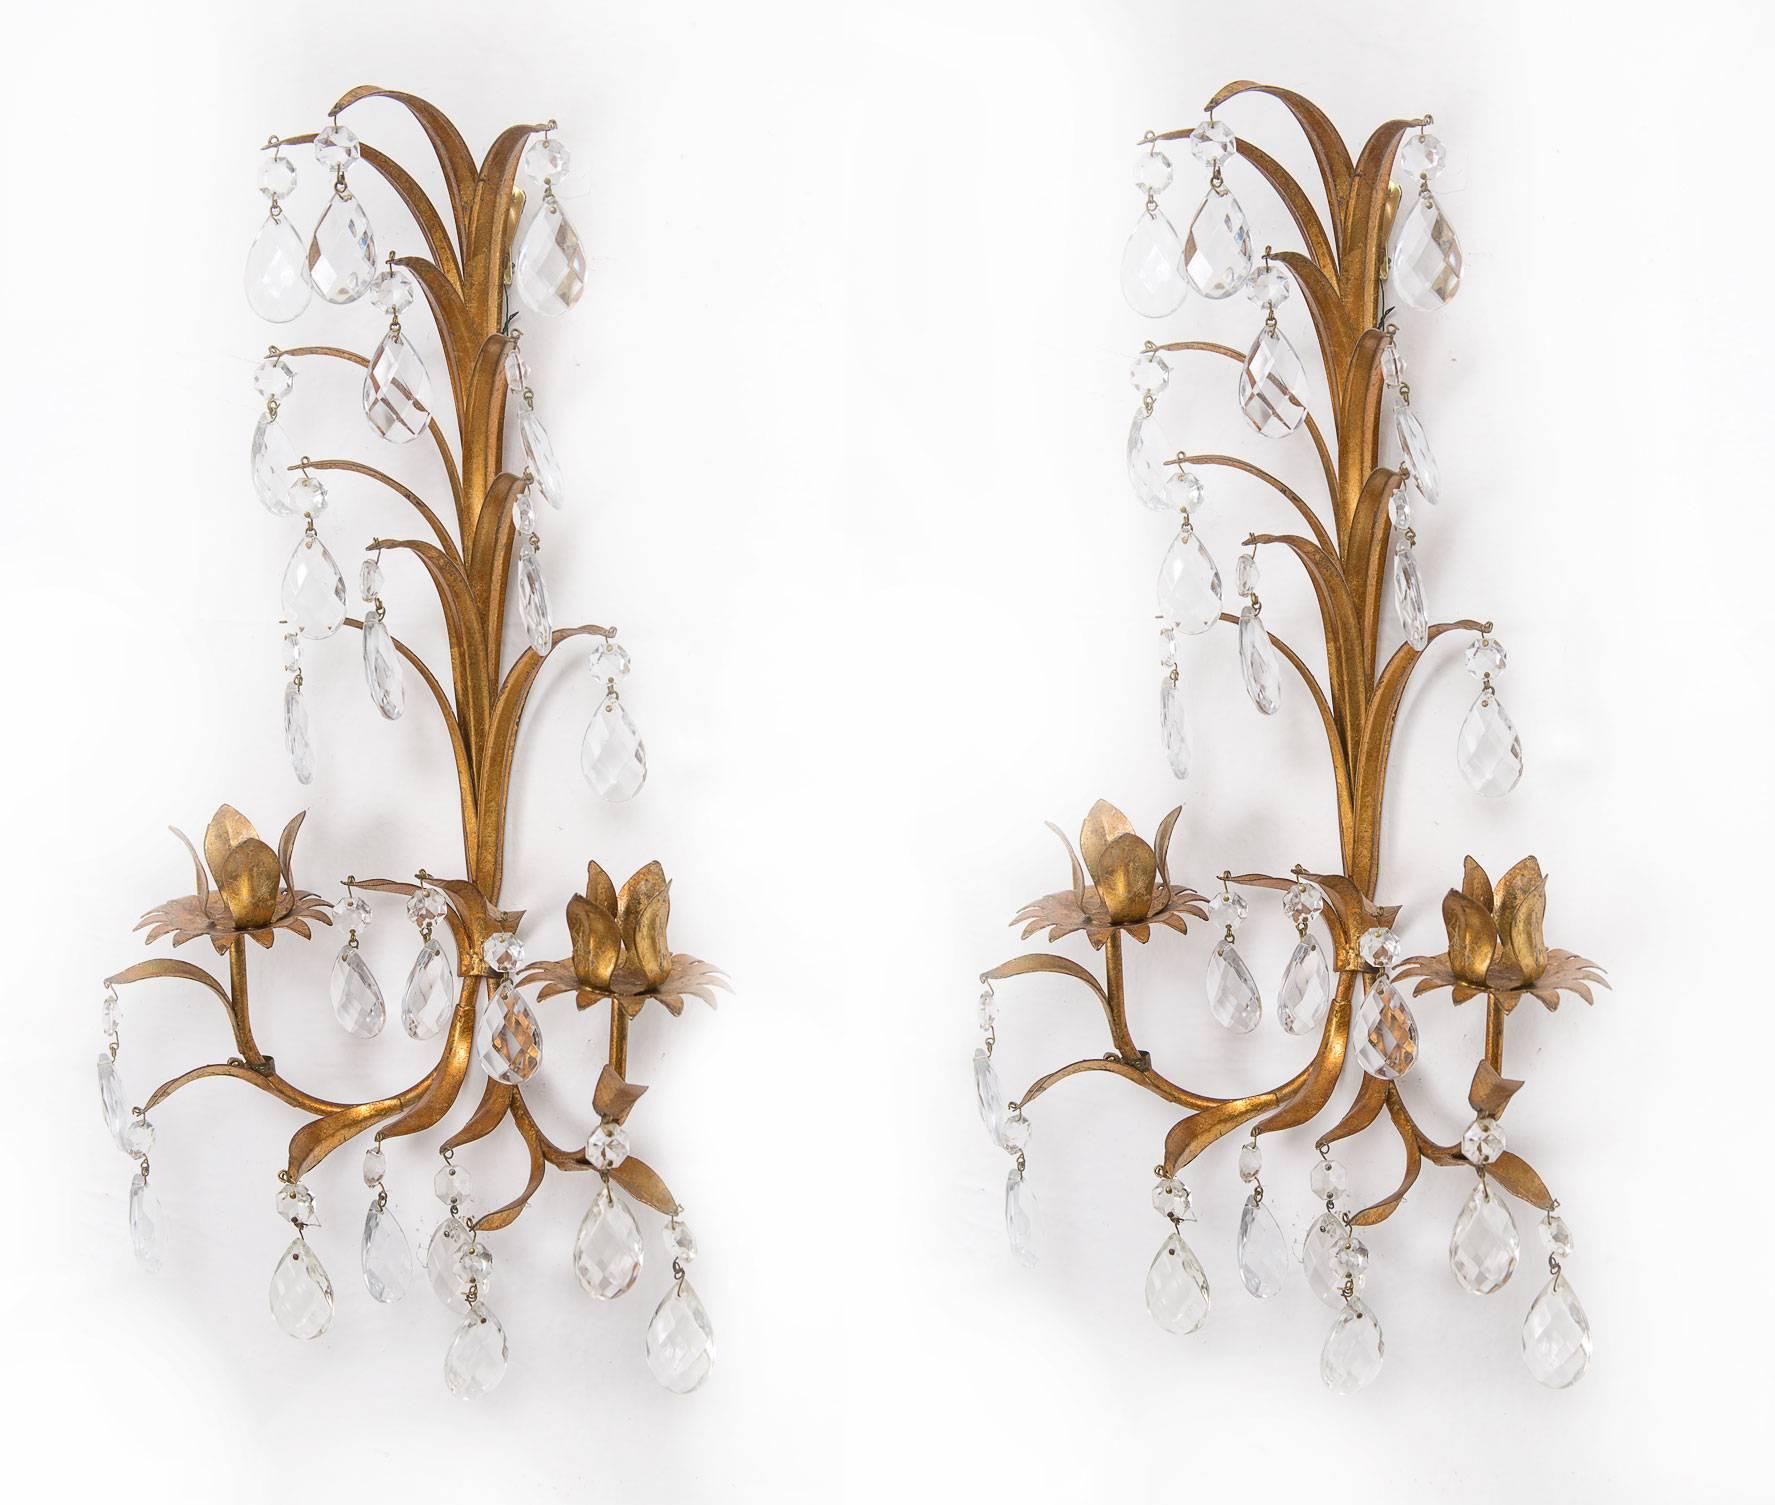 A delicate pair of Italian Florentine gilt metal sconces with faceted crystal drops and candle cups, circa 1950.